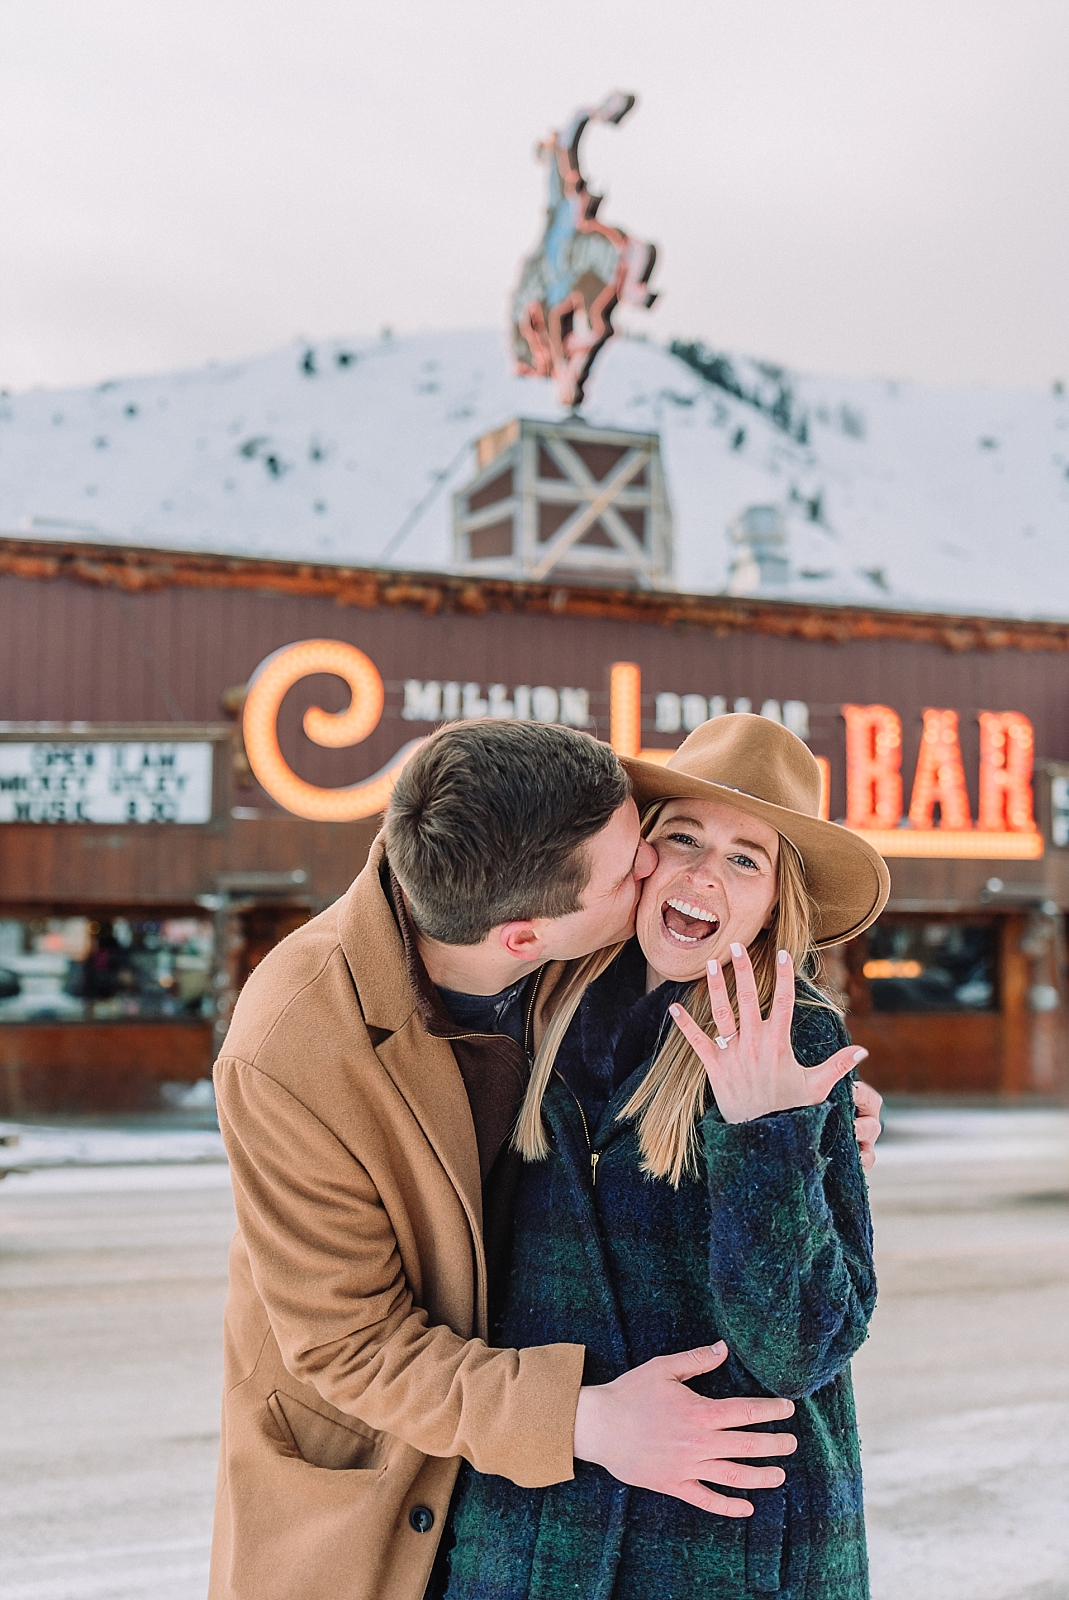 Jackson Hole Engagement Photography in front of the Million Dollar Cowboy Bar